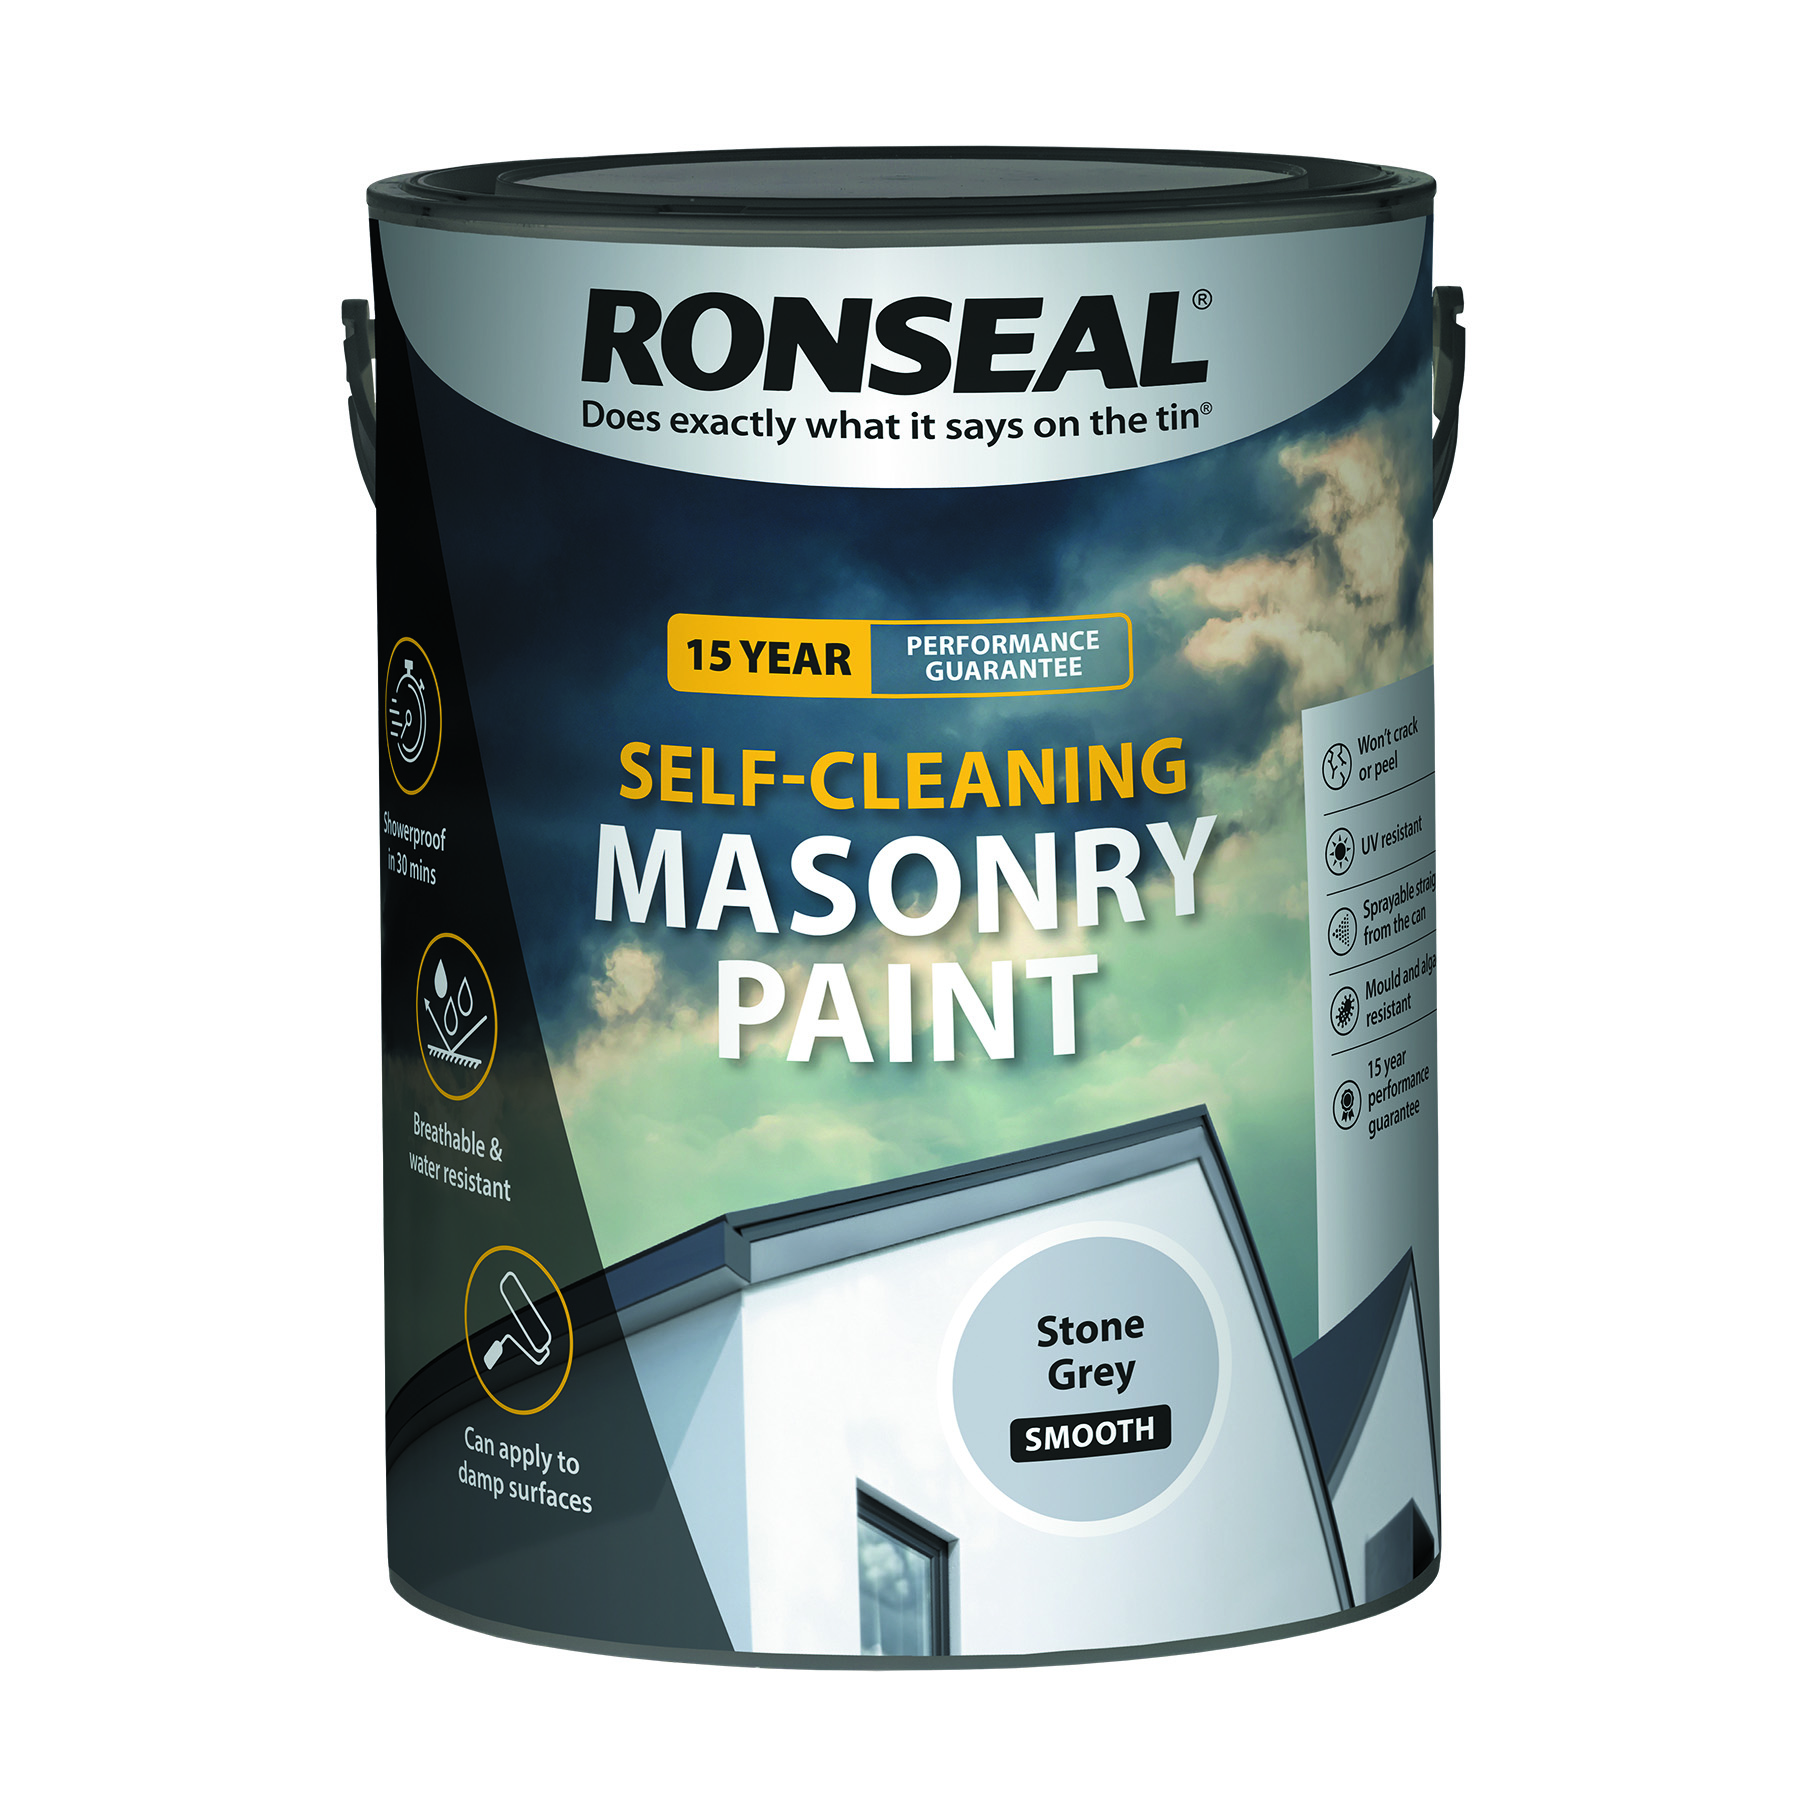 Ronseal Self-cleaning Masonry Paint - Stone Grey - 5l